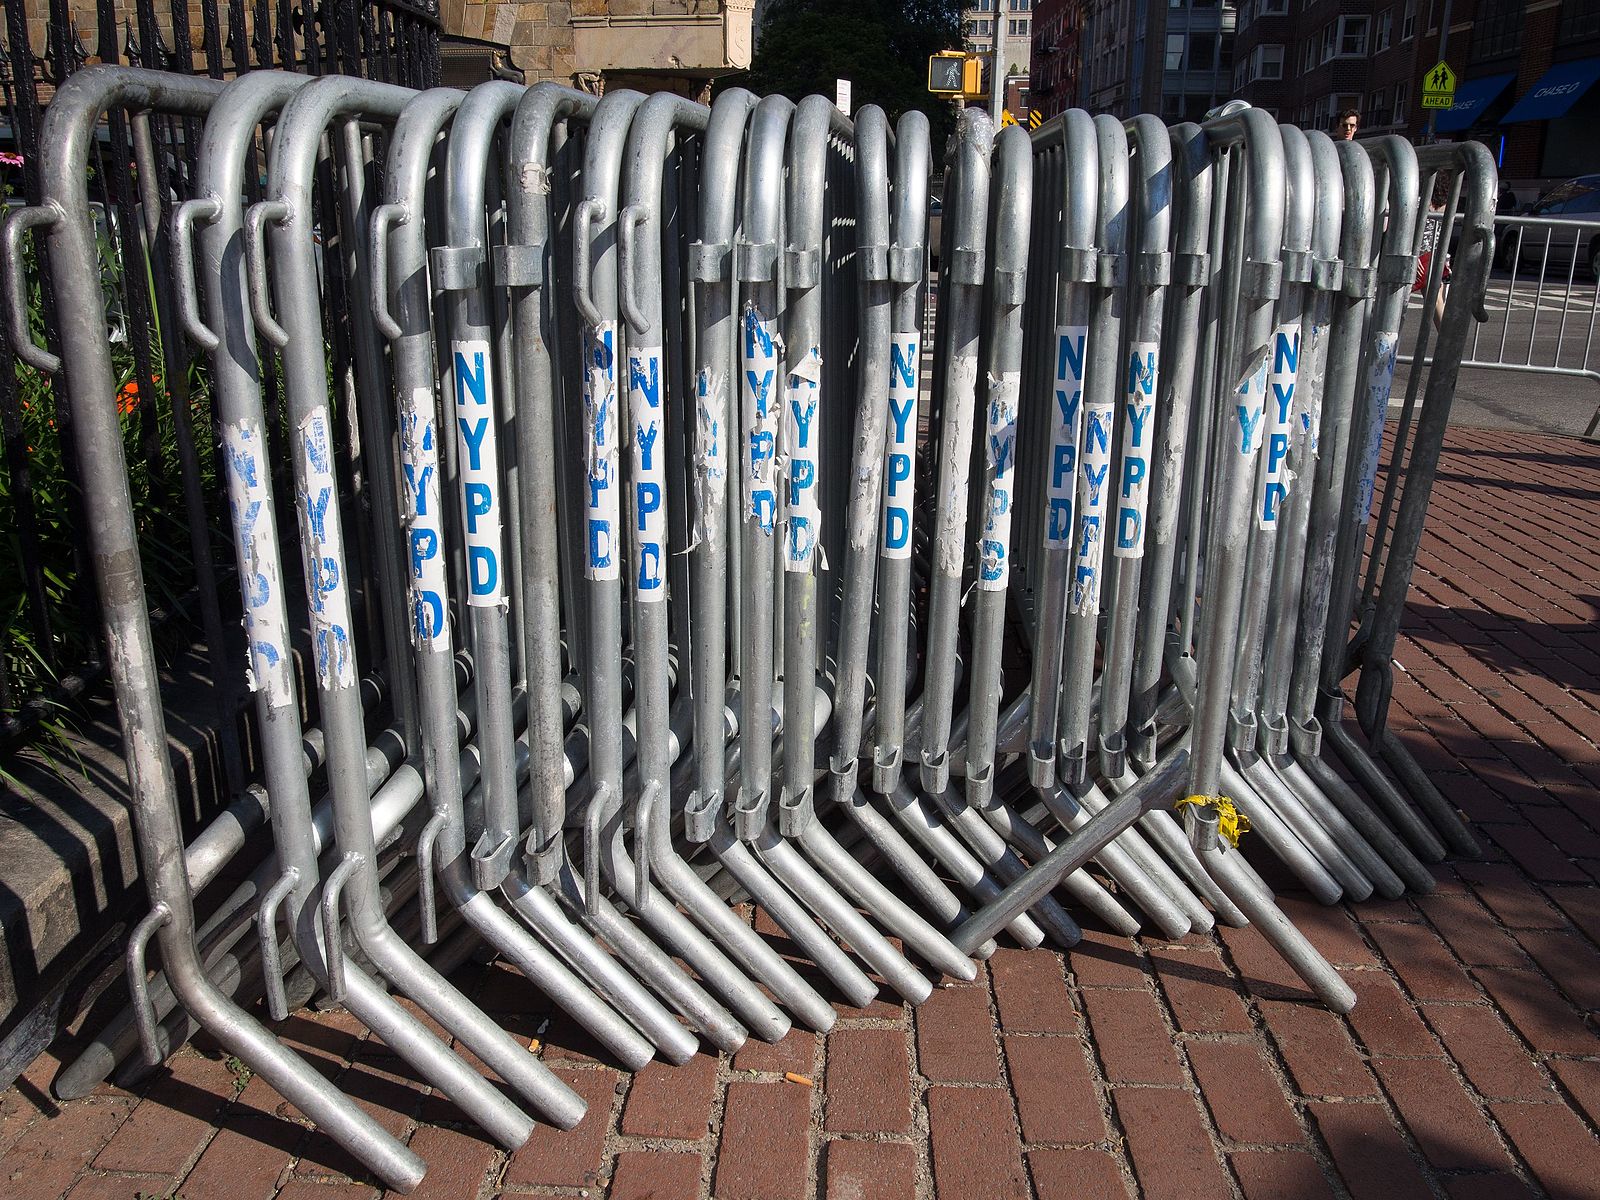 1600px-nypd_metal_crowd_control_barriers_1.jpg